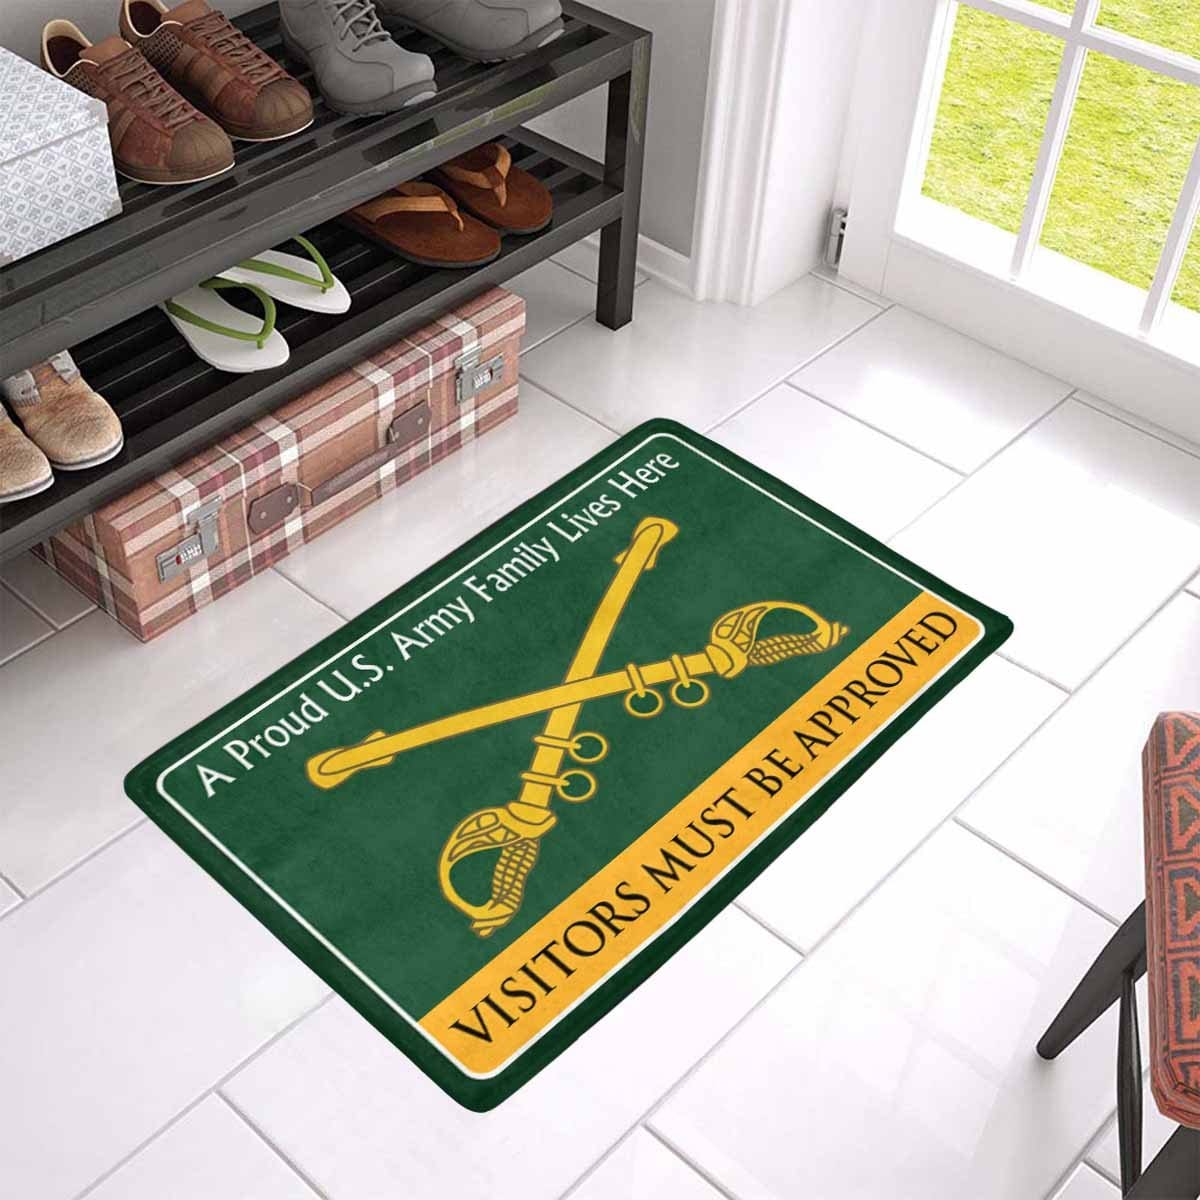 United States Cavalry Family Doormat - Visitors must be approved Doormat (23.6 inches x 15.7 inches)-Doormat-Army-Branch-Veterans Nation